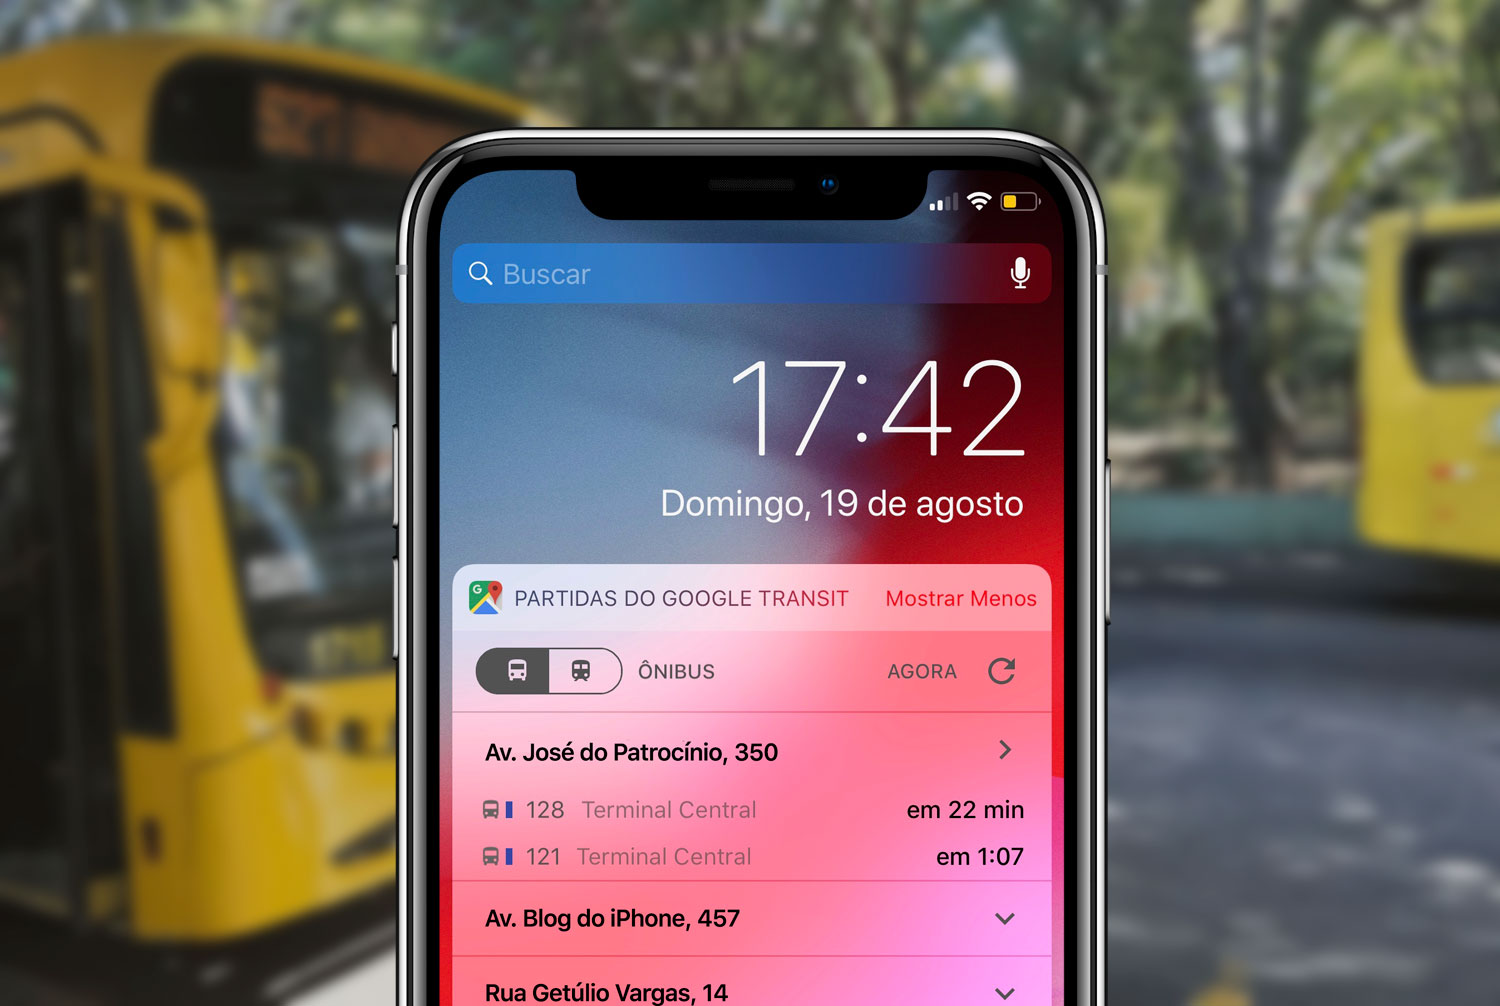 See how to track bus schedules in real time in a Notification Center widget